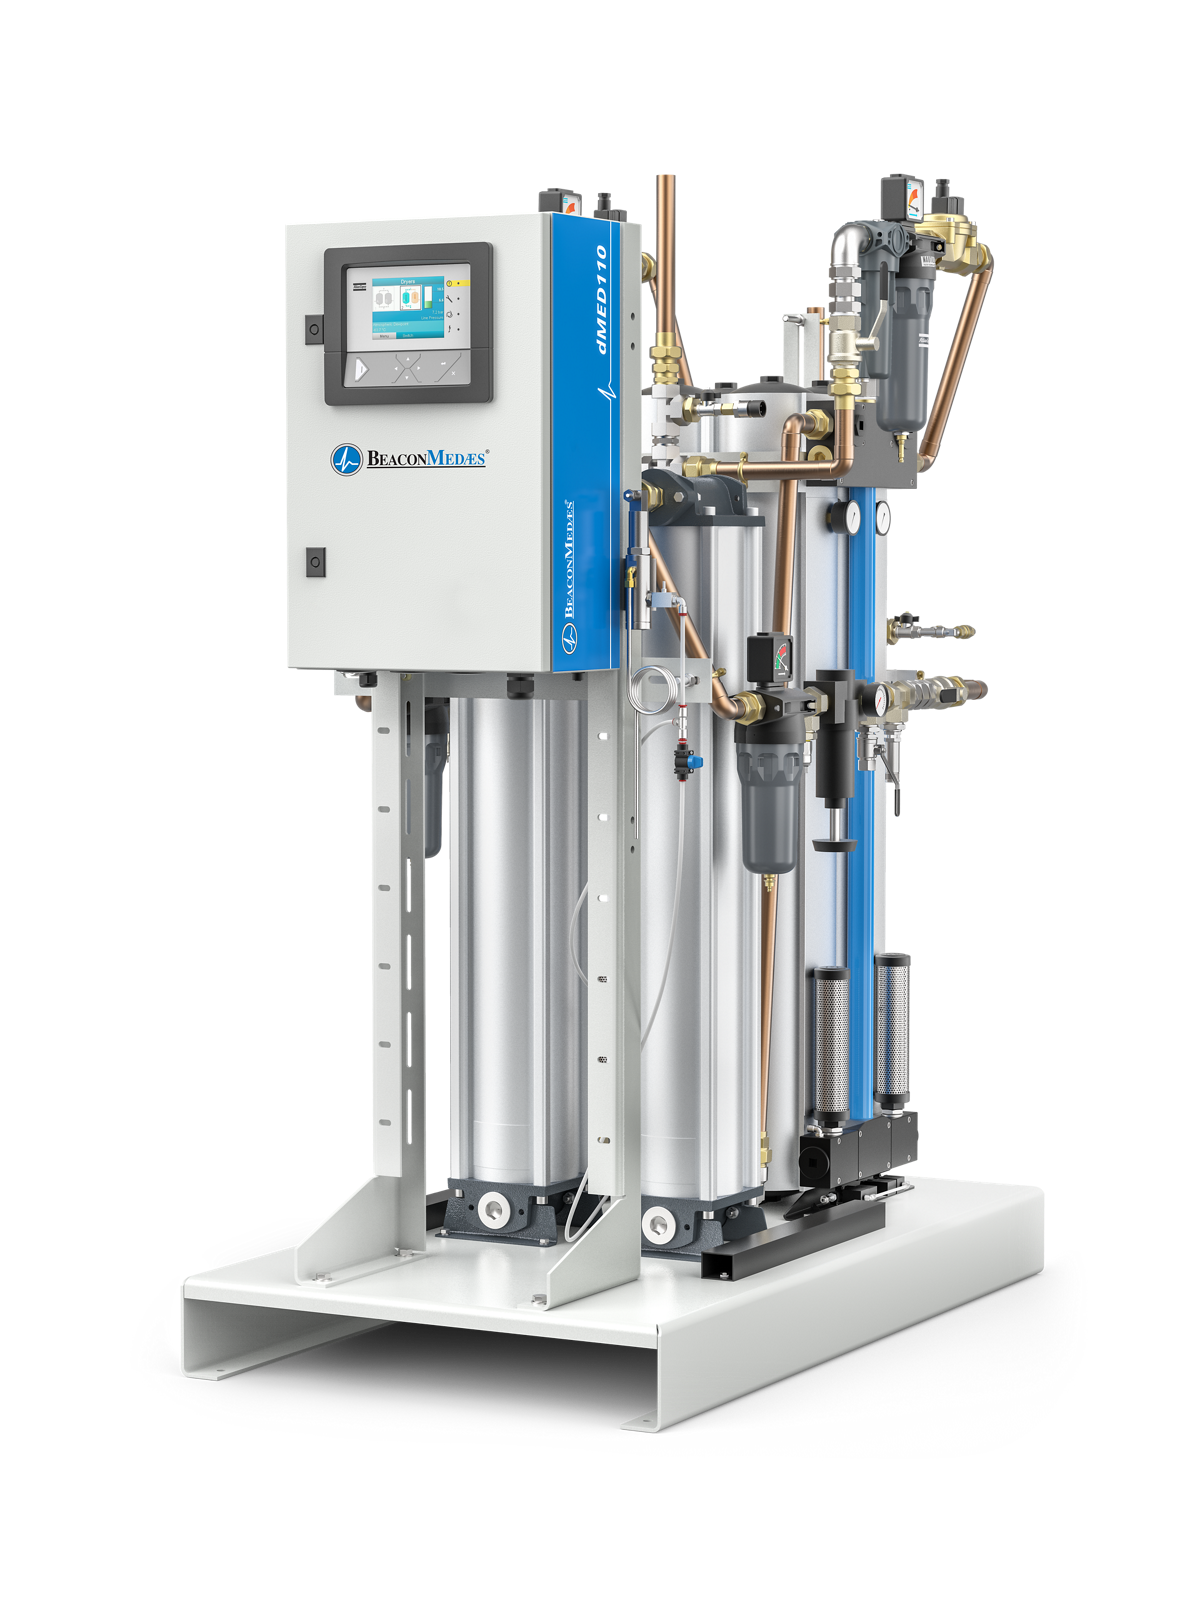 Providers of Medical Desiccant Air Dryers